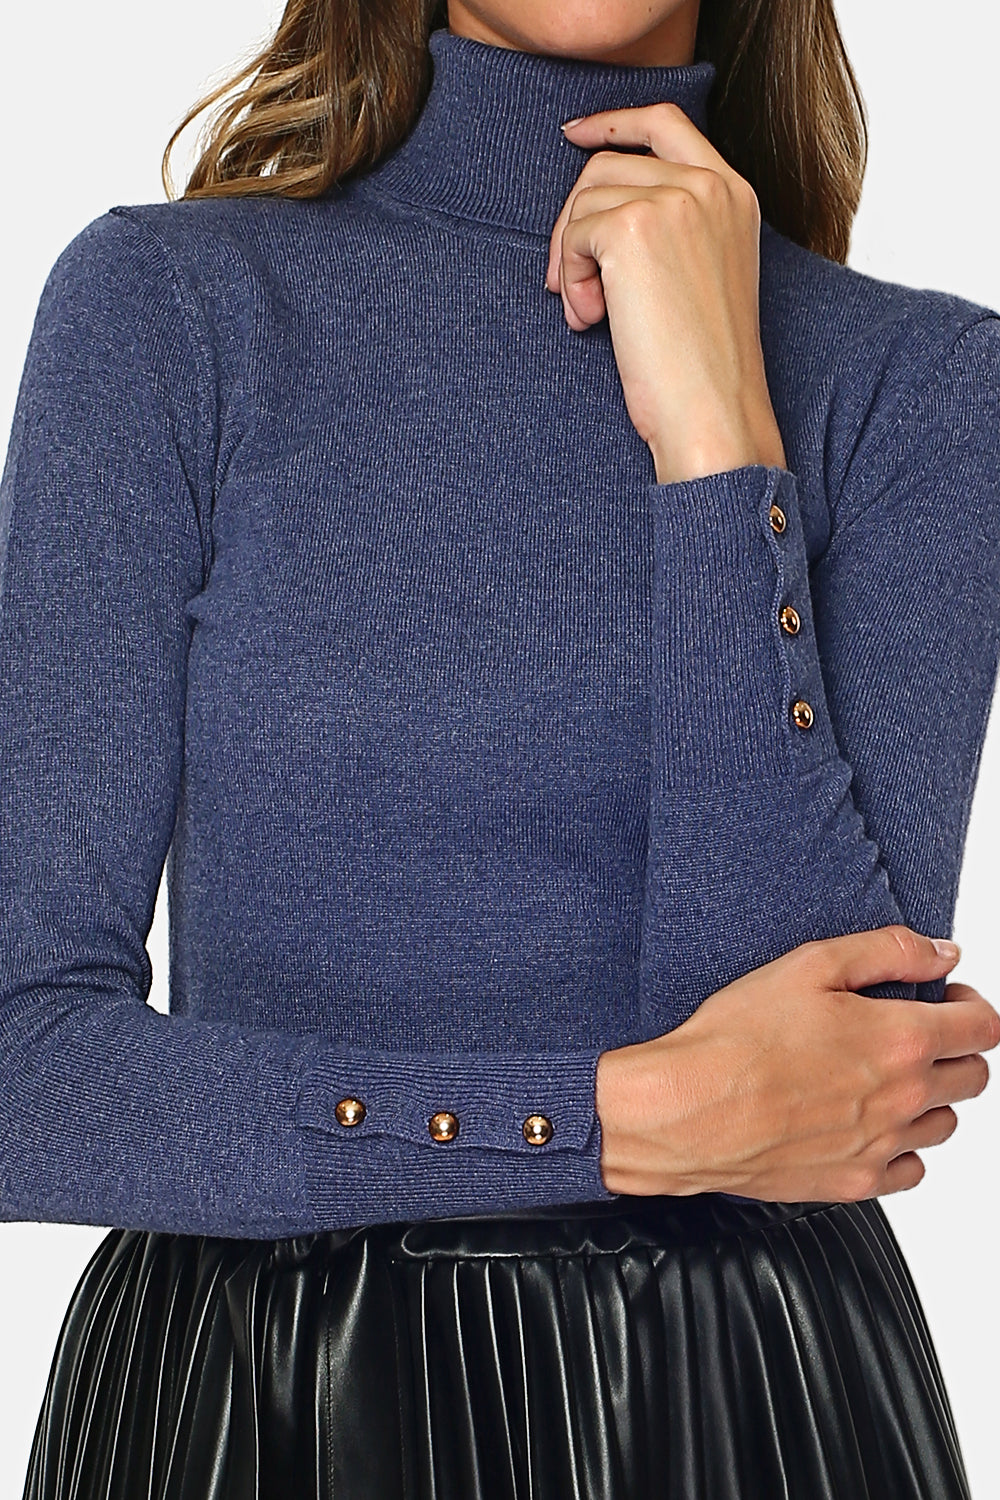 TURTLENECK SWEATER WITH GOLDEN BUTTONS ON CUFFS